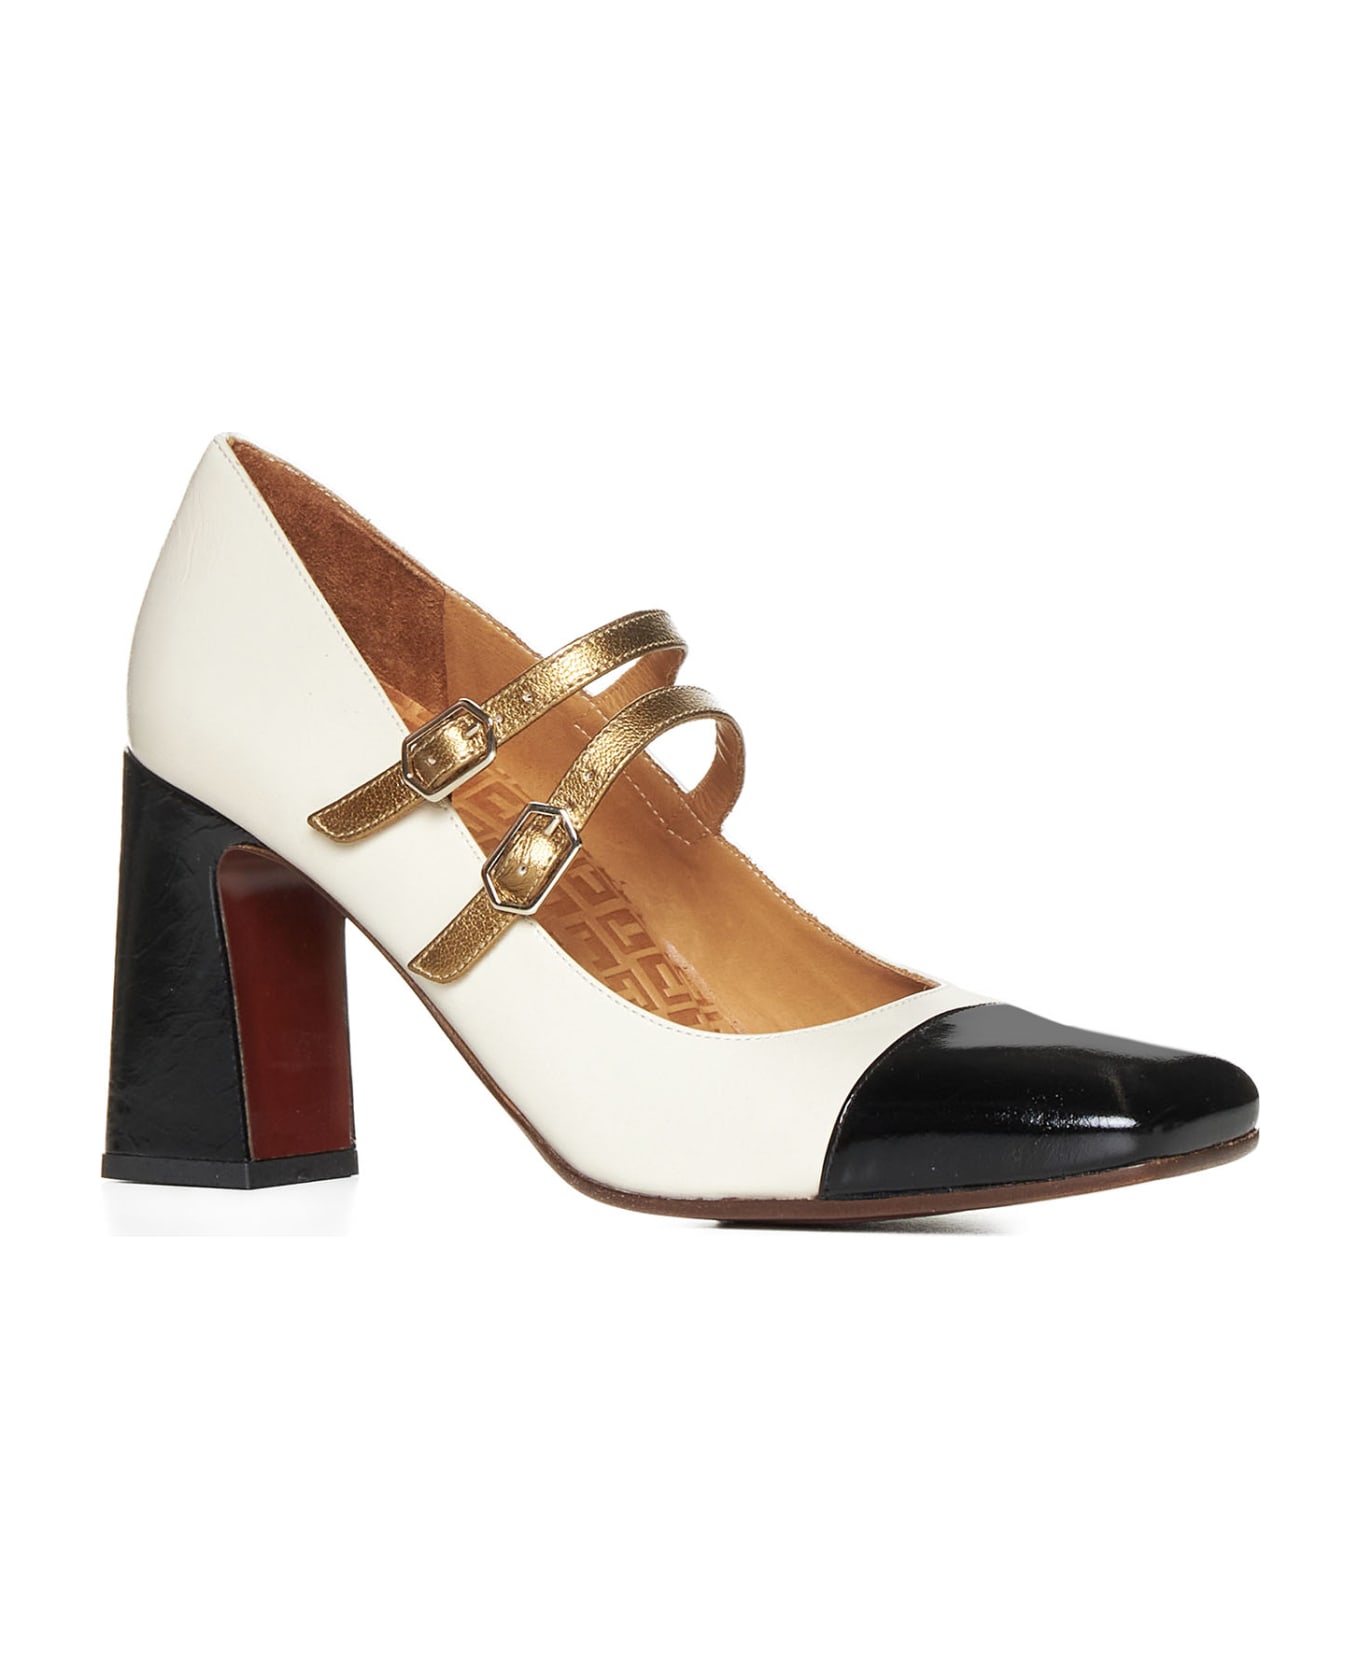 Chie Mihara High-heeled shoe - Negro leche bronce